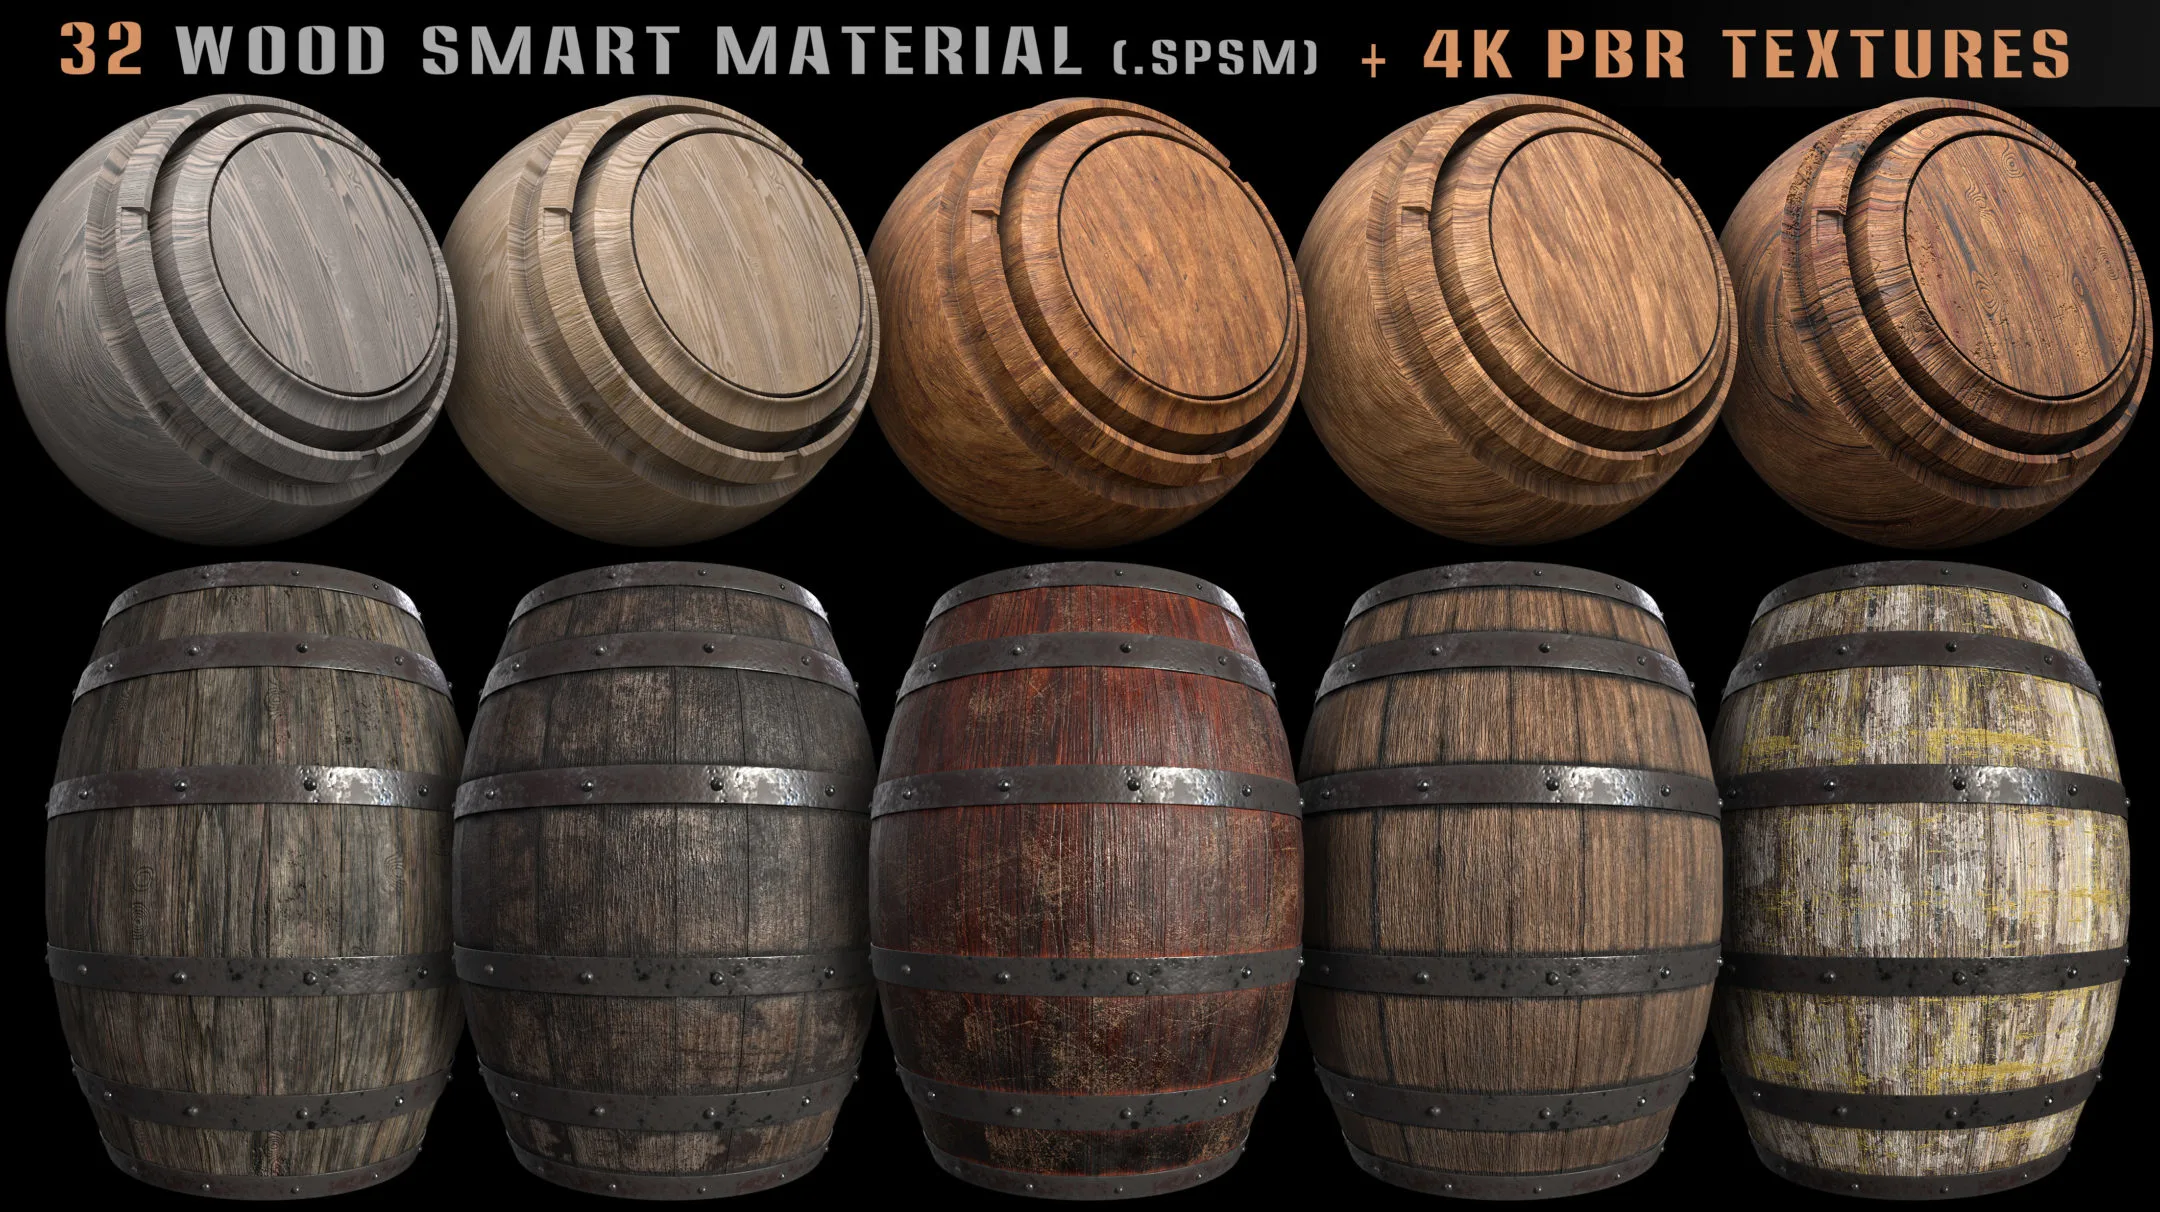 32 wood smart material and 4k PBR textures - Vol 7